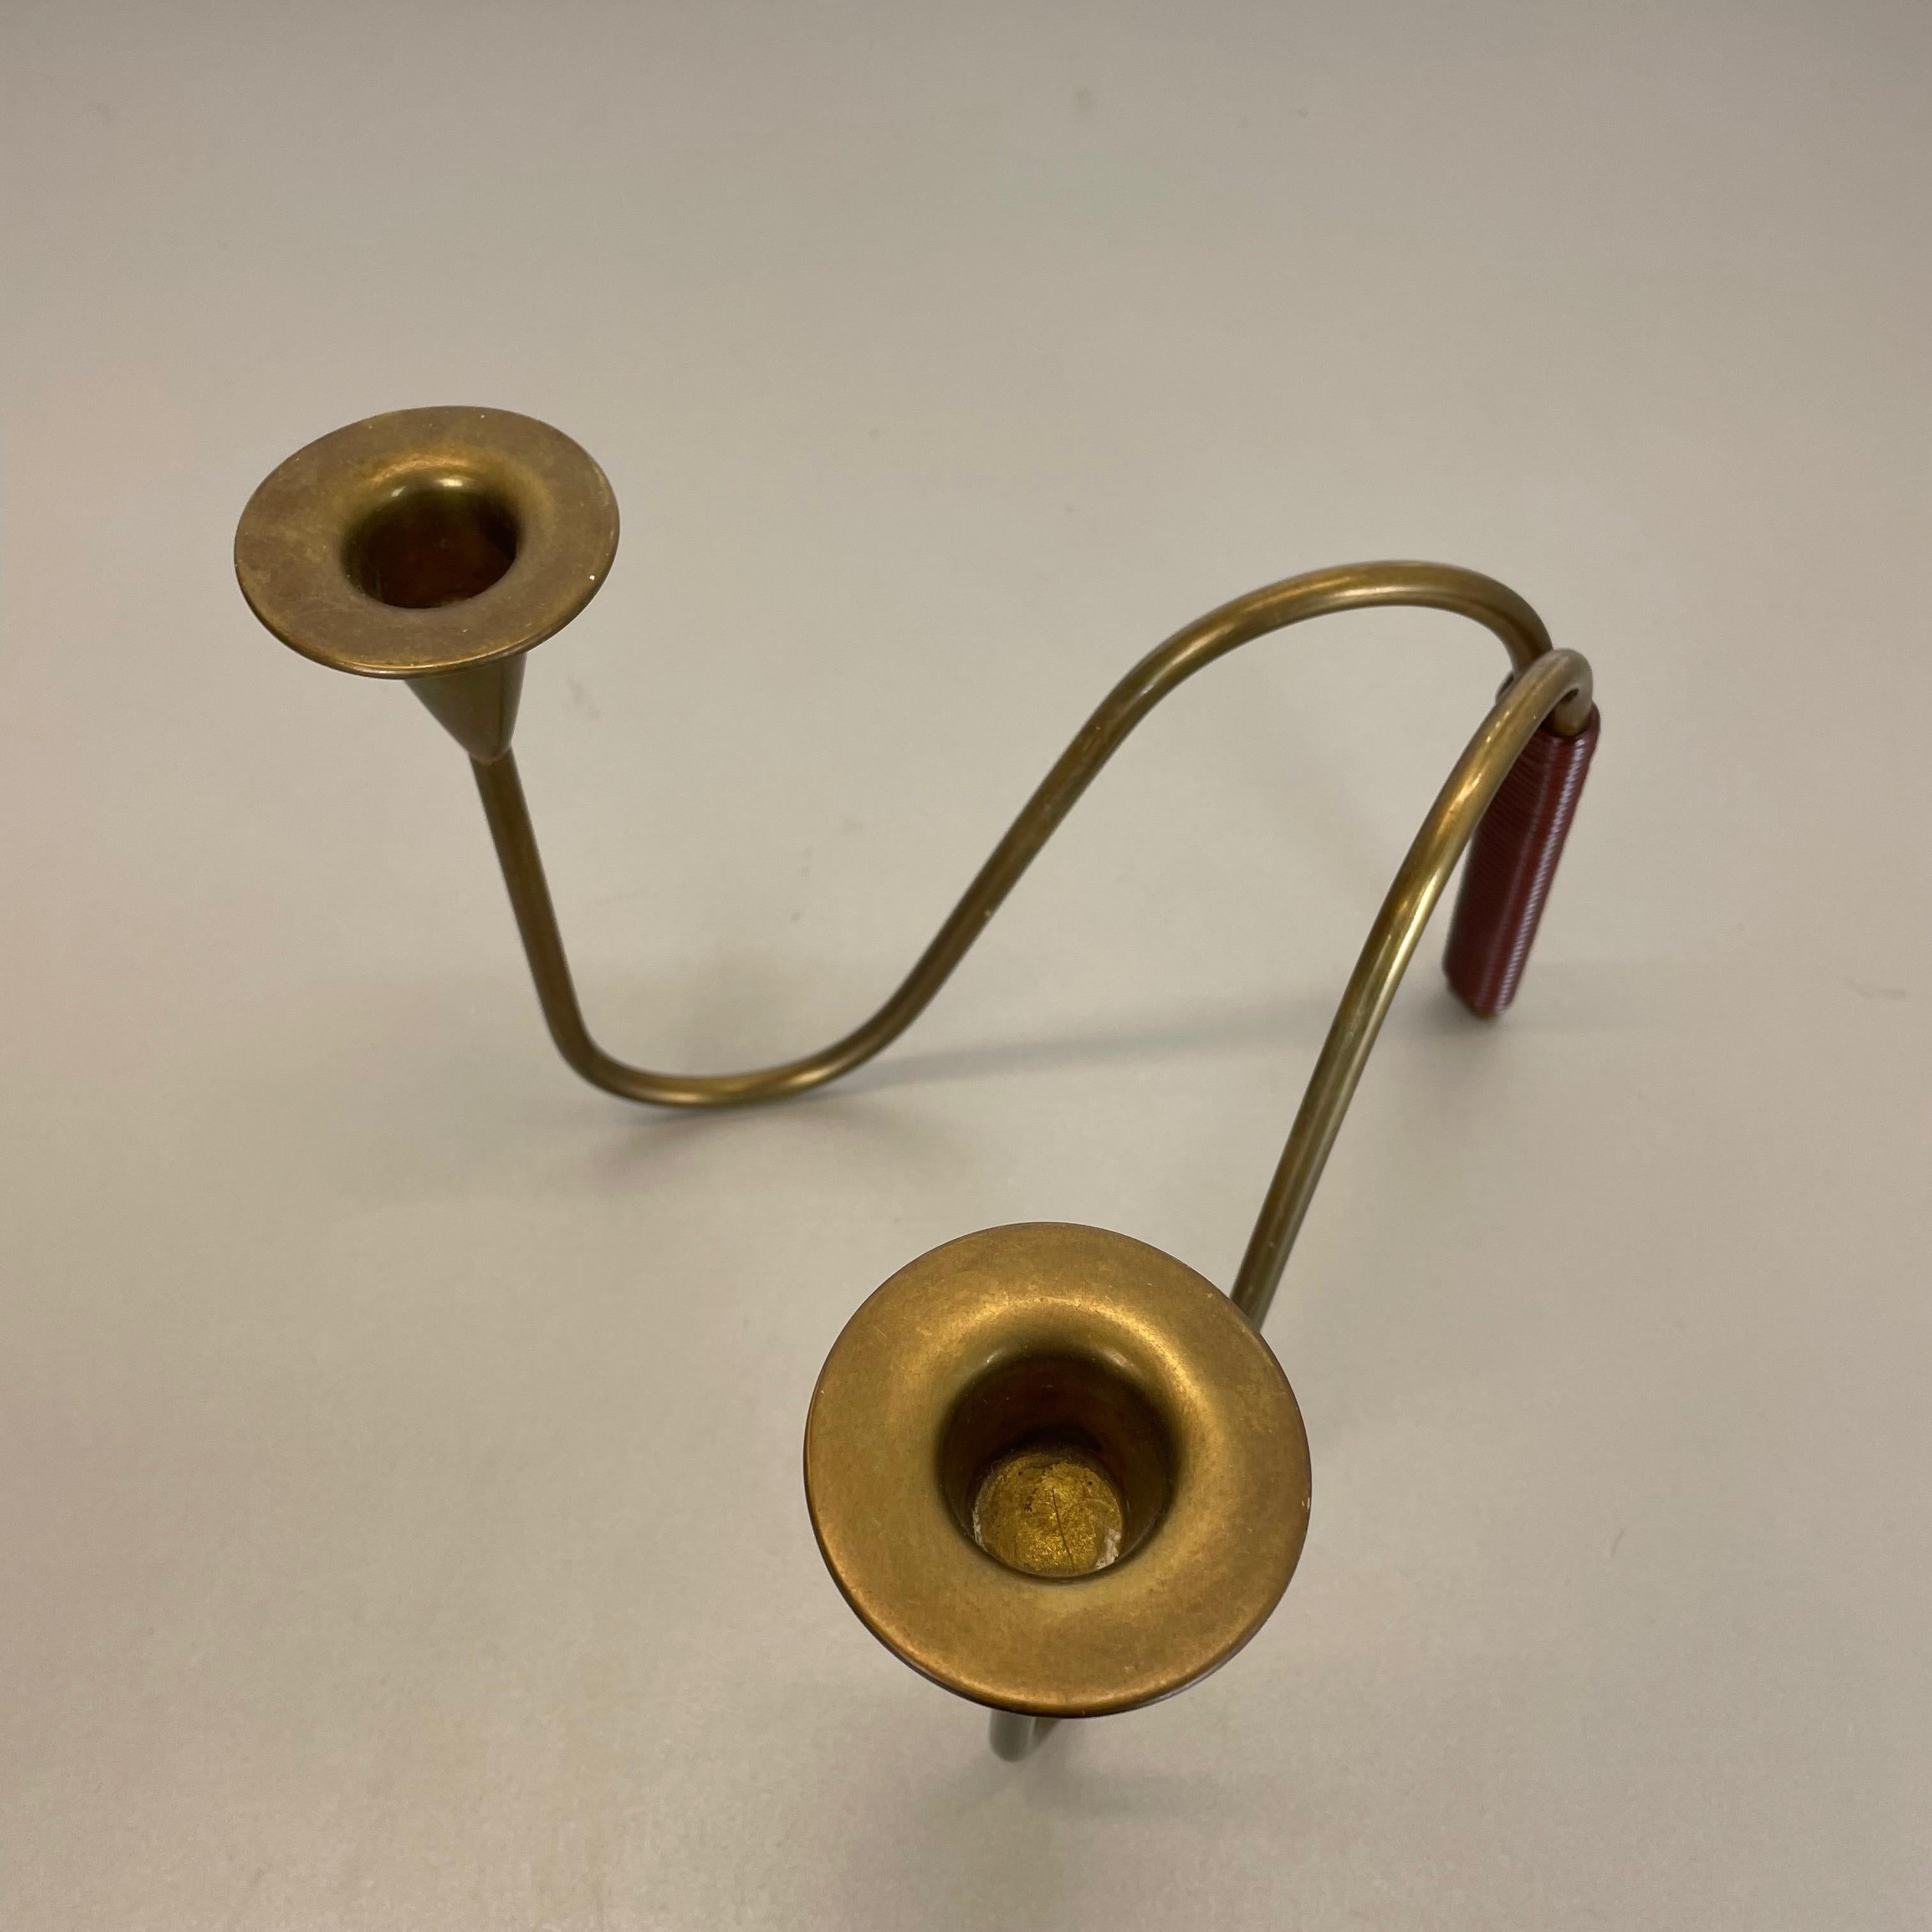 Sculptural Brass Candleholder Object by Günter Kupetz for WMF, Germany 1950s For Sale 2